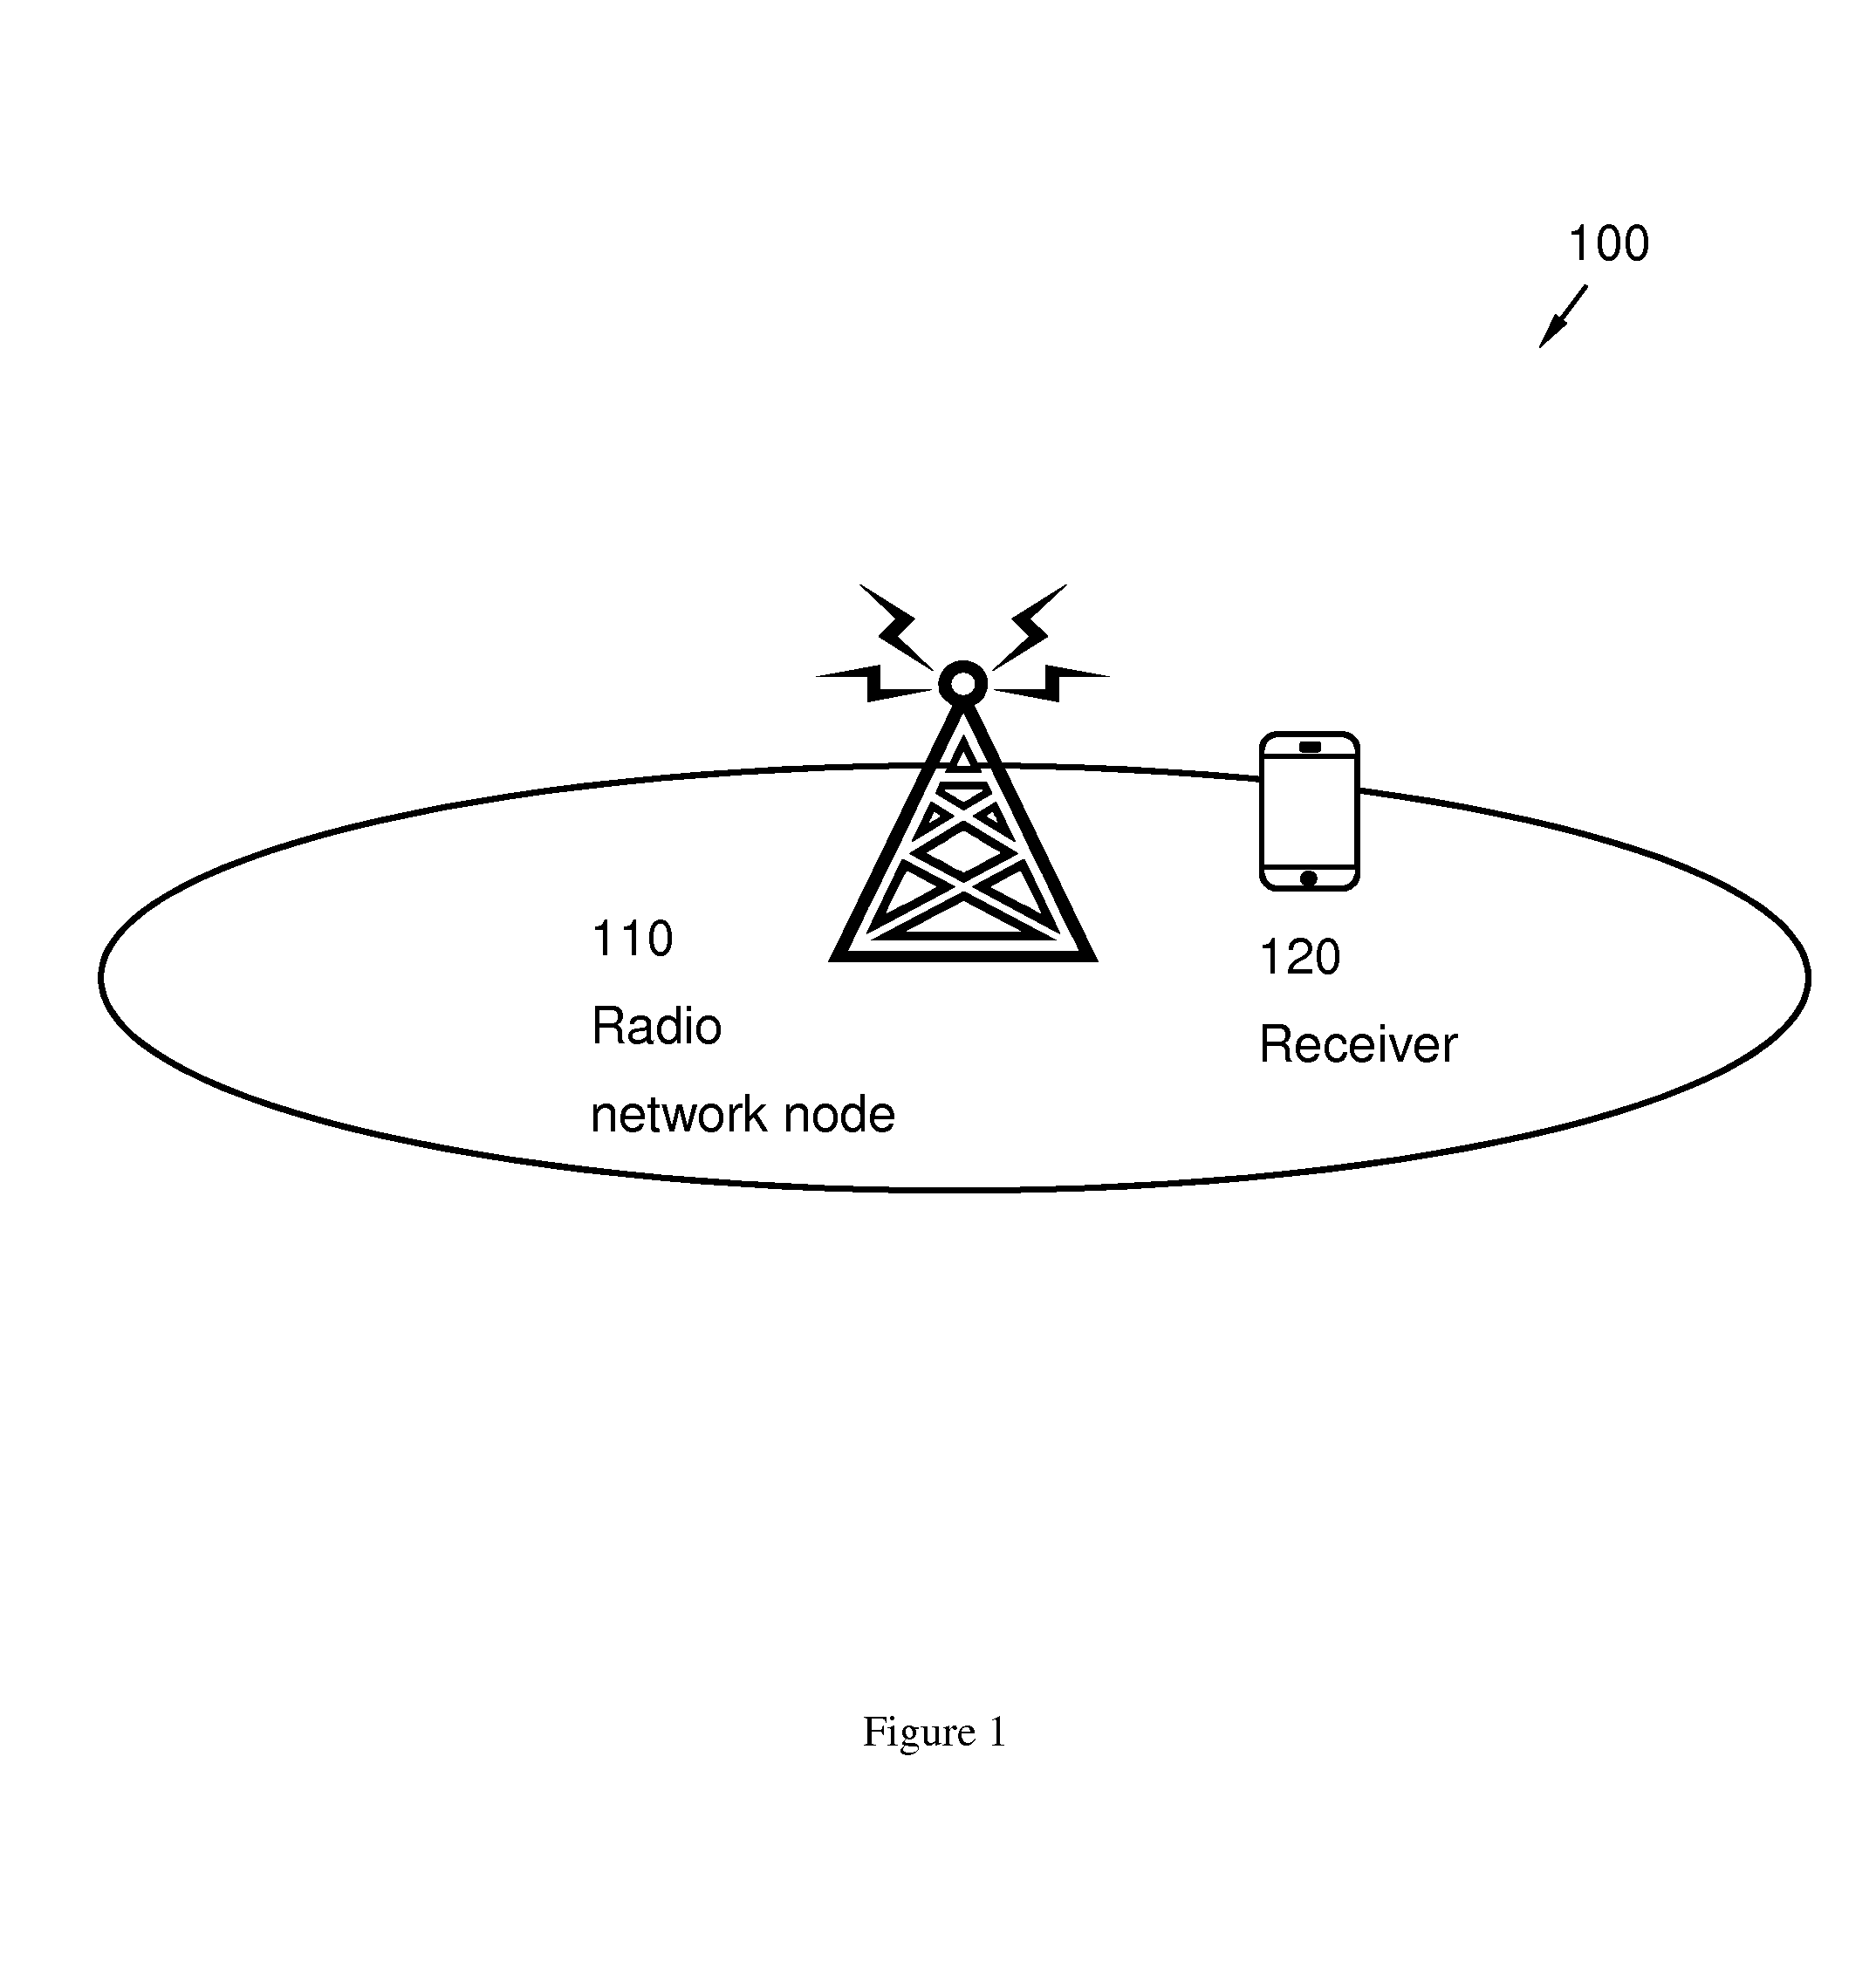 Methods and Nodes in a Wireless Communication Network